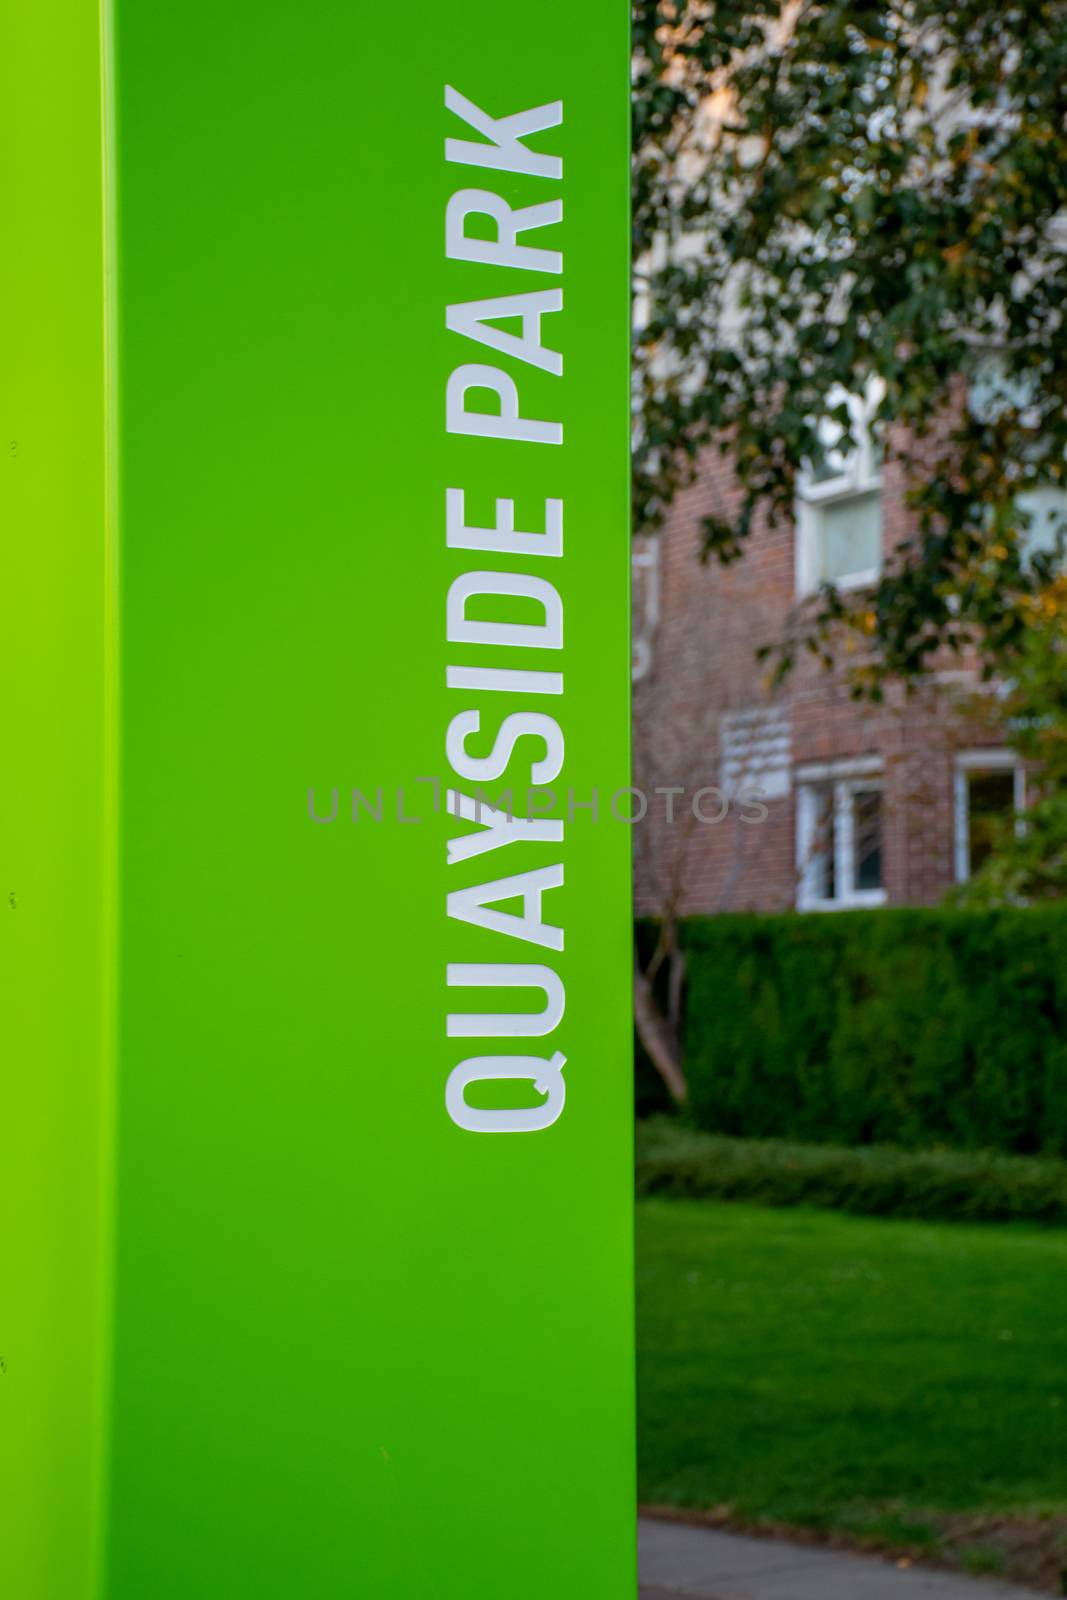 Bright Green Quayside Park sign along the New Westminster, British Columbia walkway with copy space